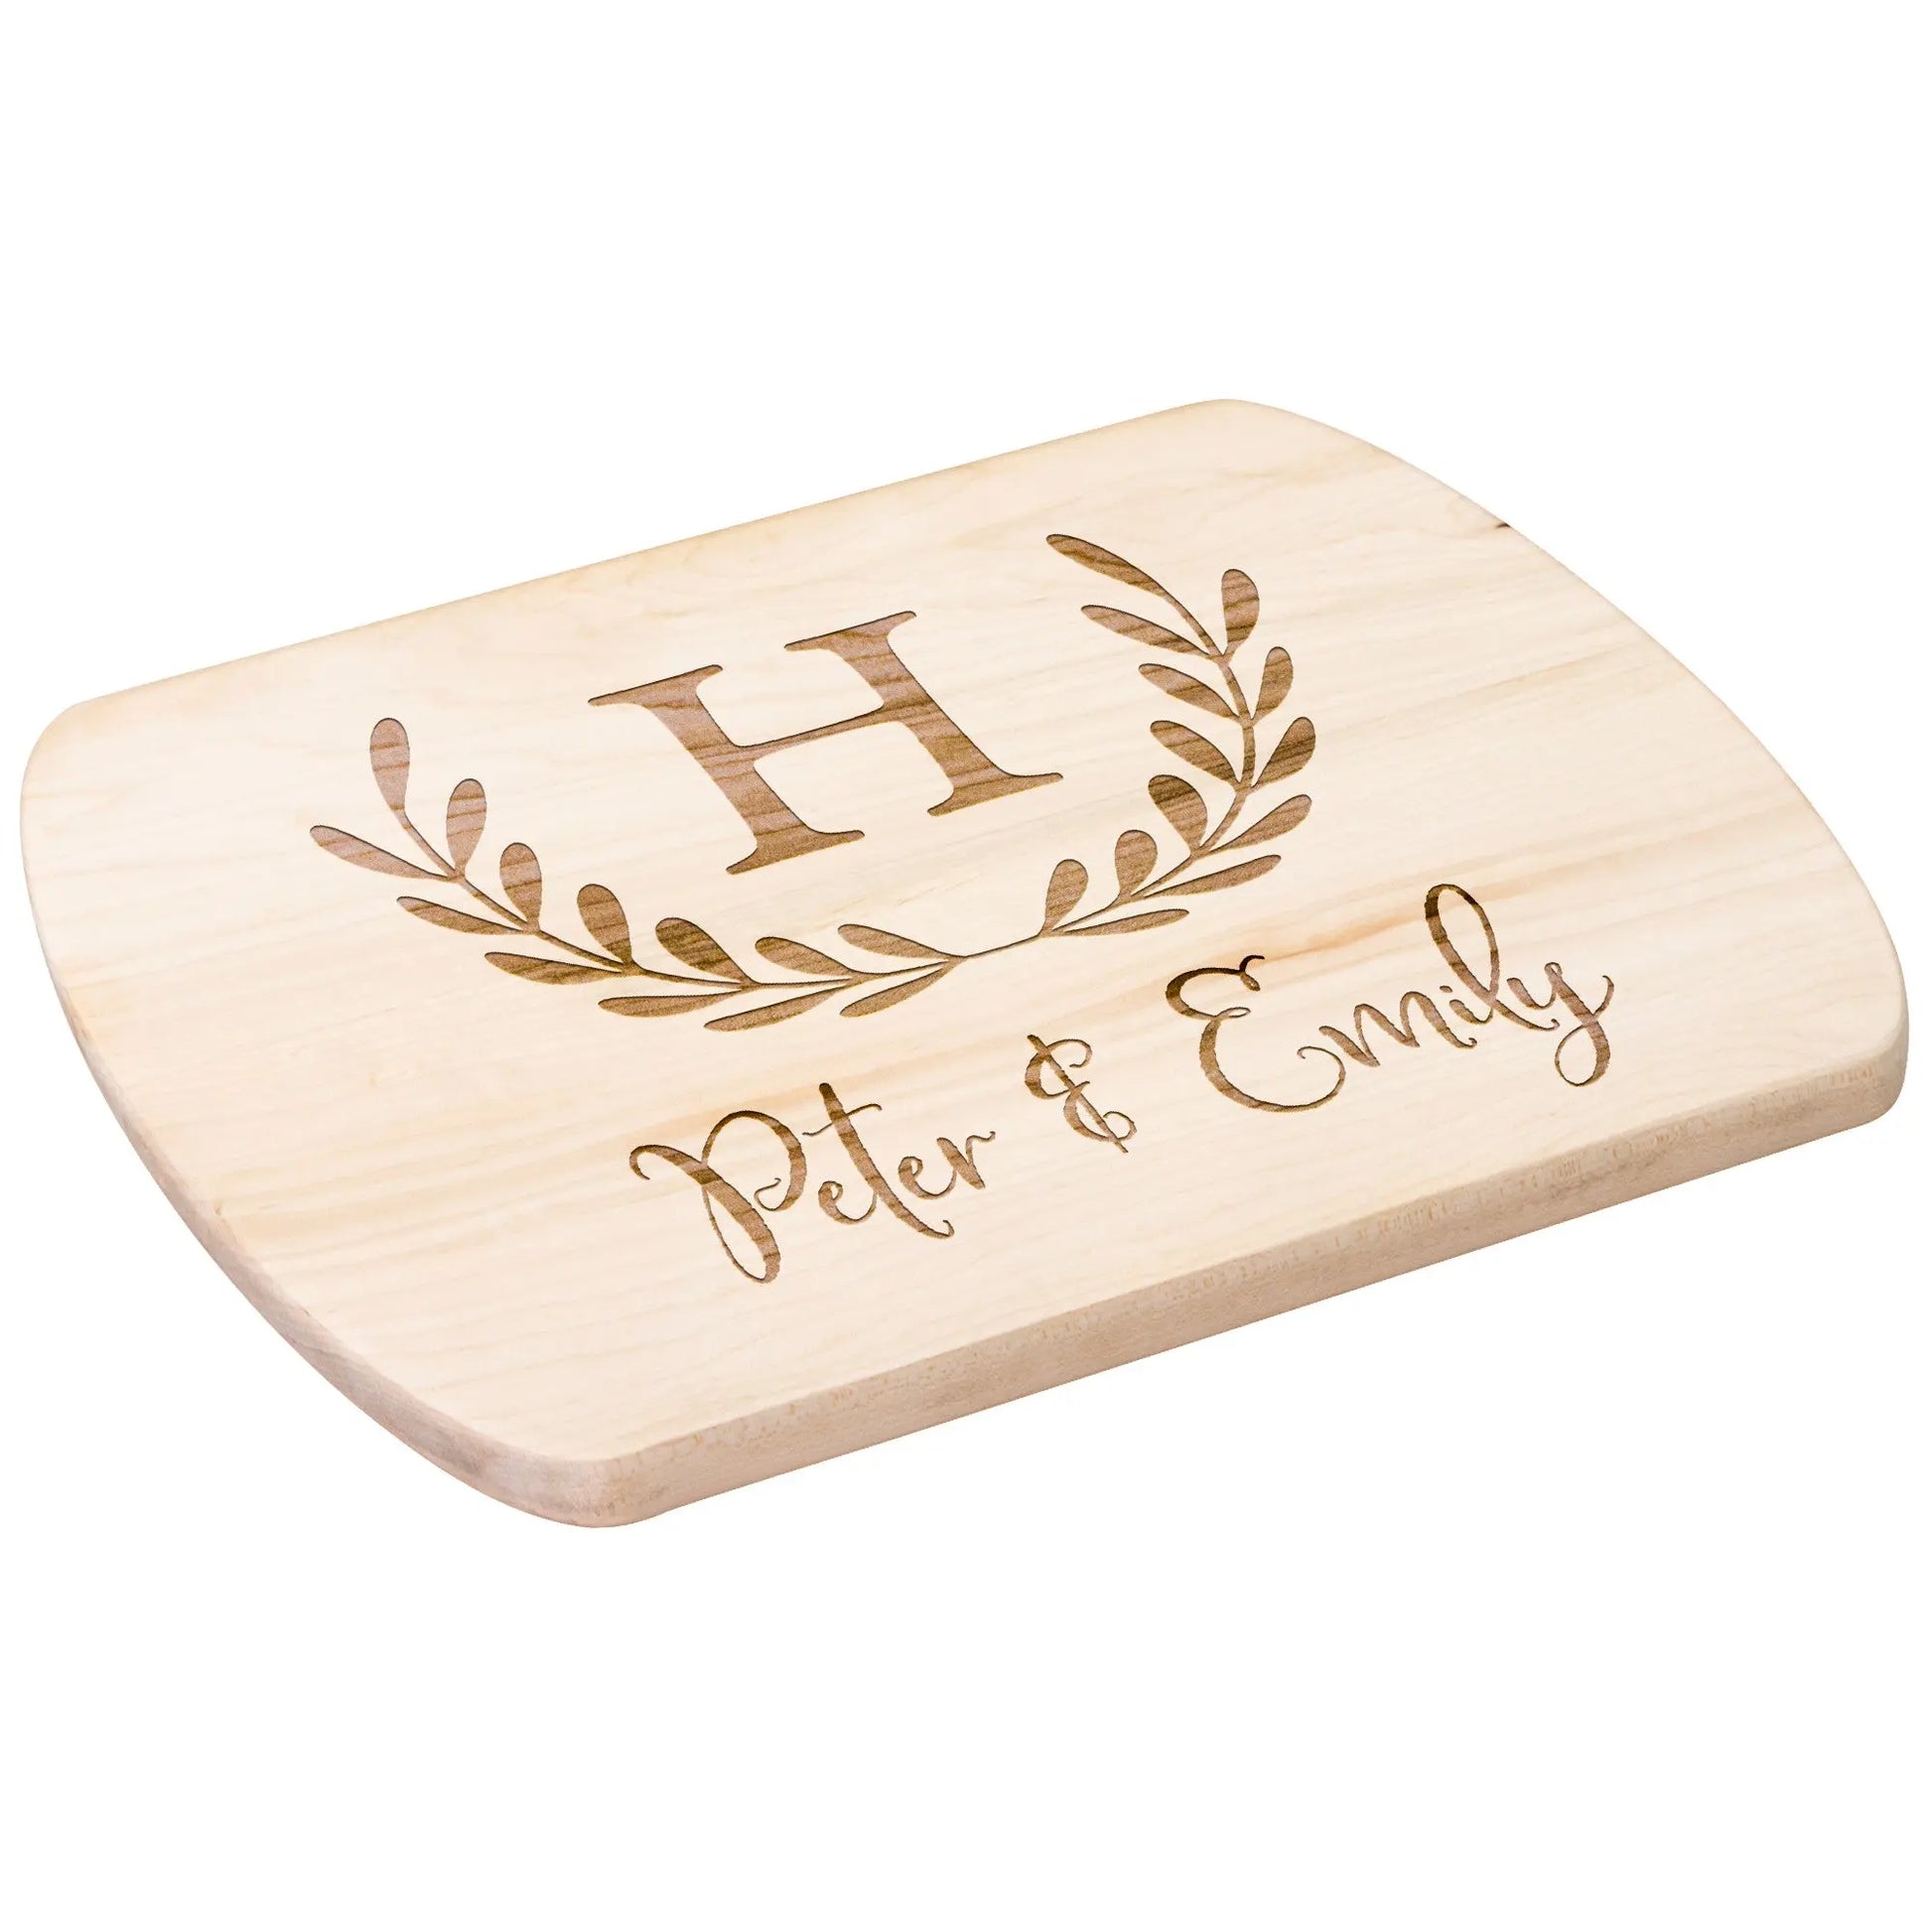 Monogram Charcuterie Board - Personalized with Names teelaunch